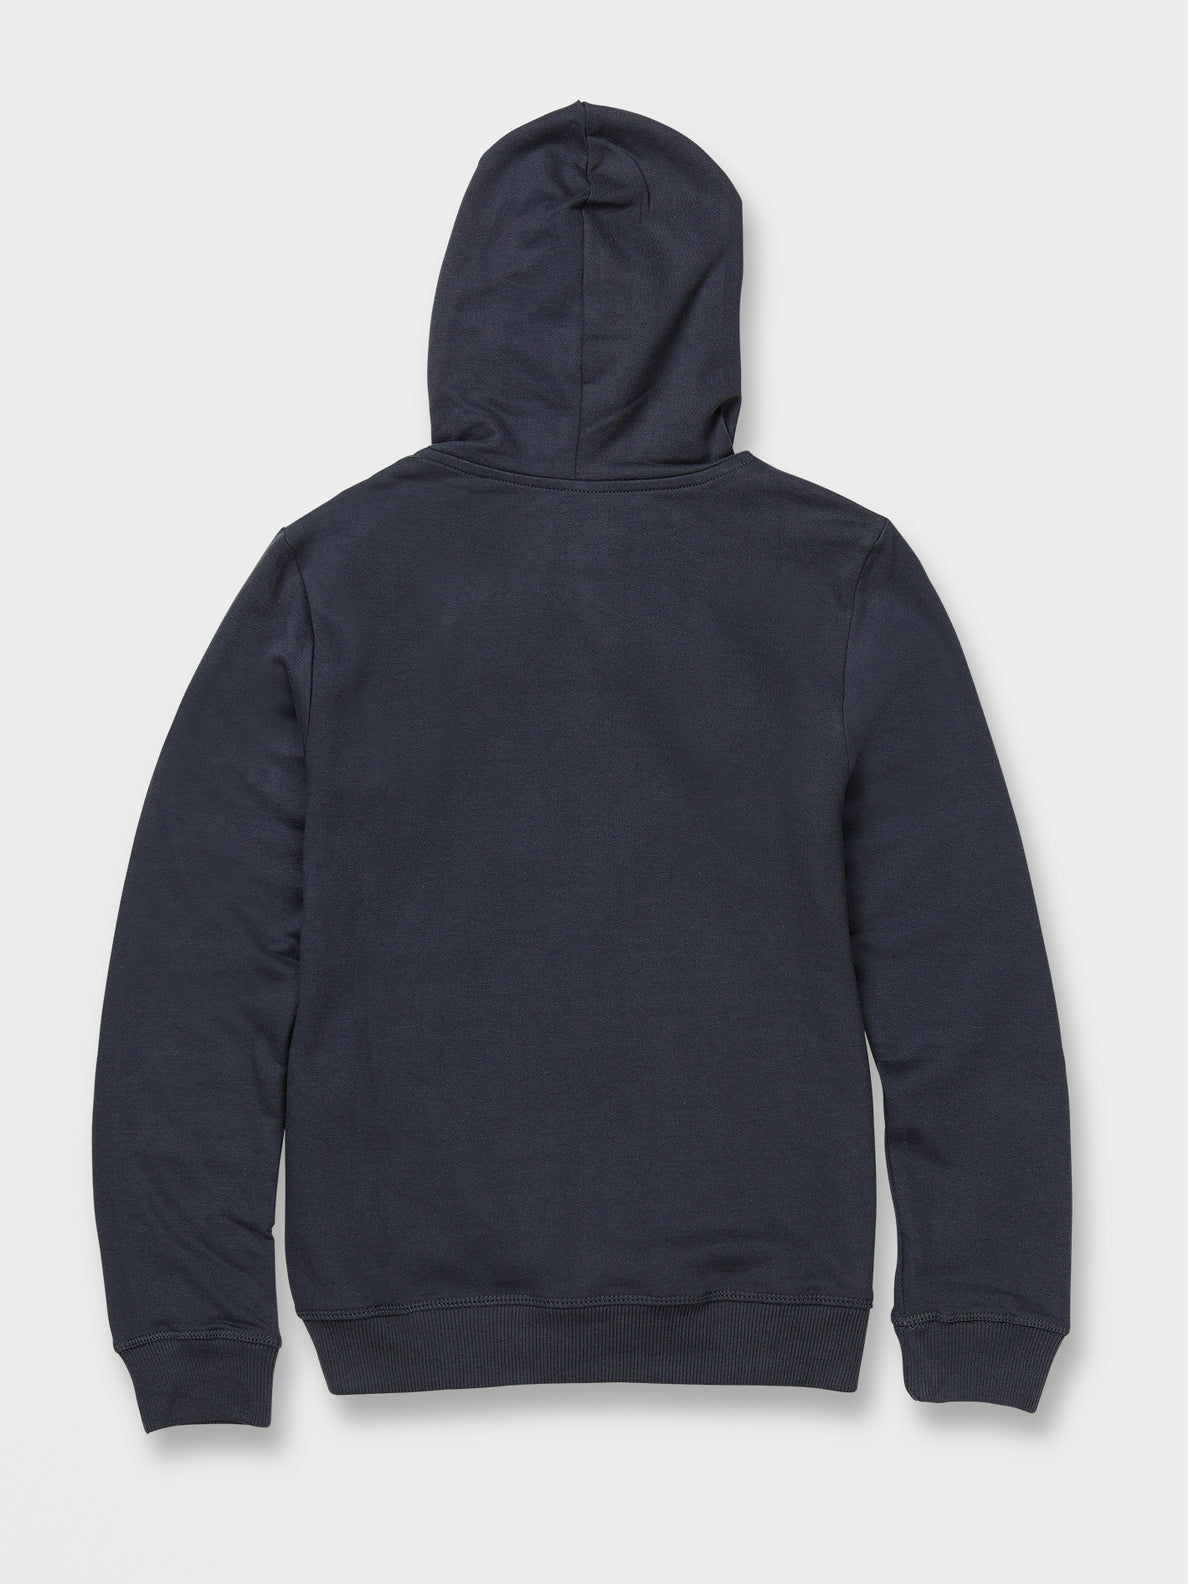 Big Boys Roundabout Pullover Fleece Hoodie - Faded Navy